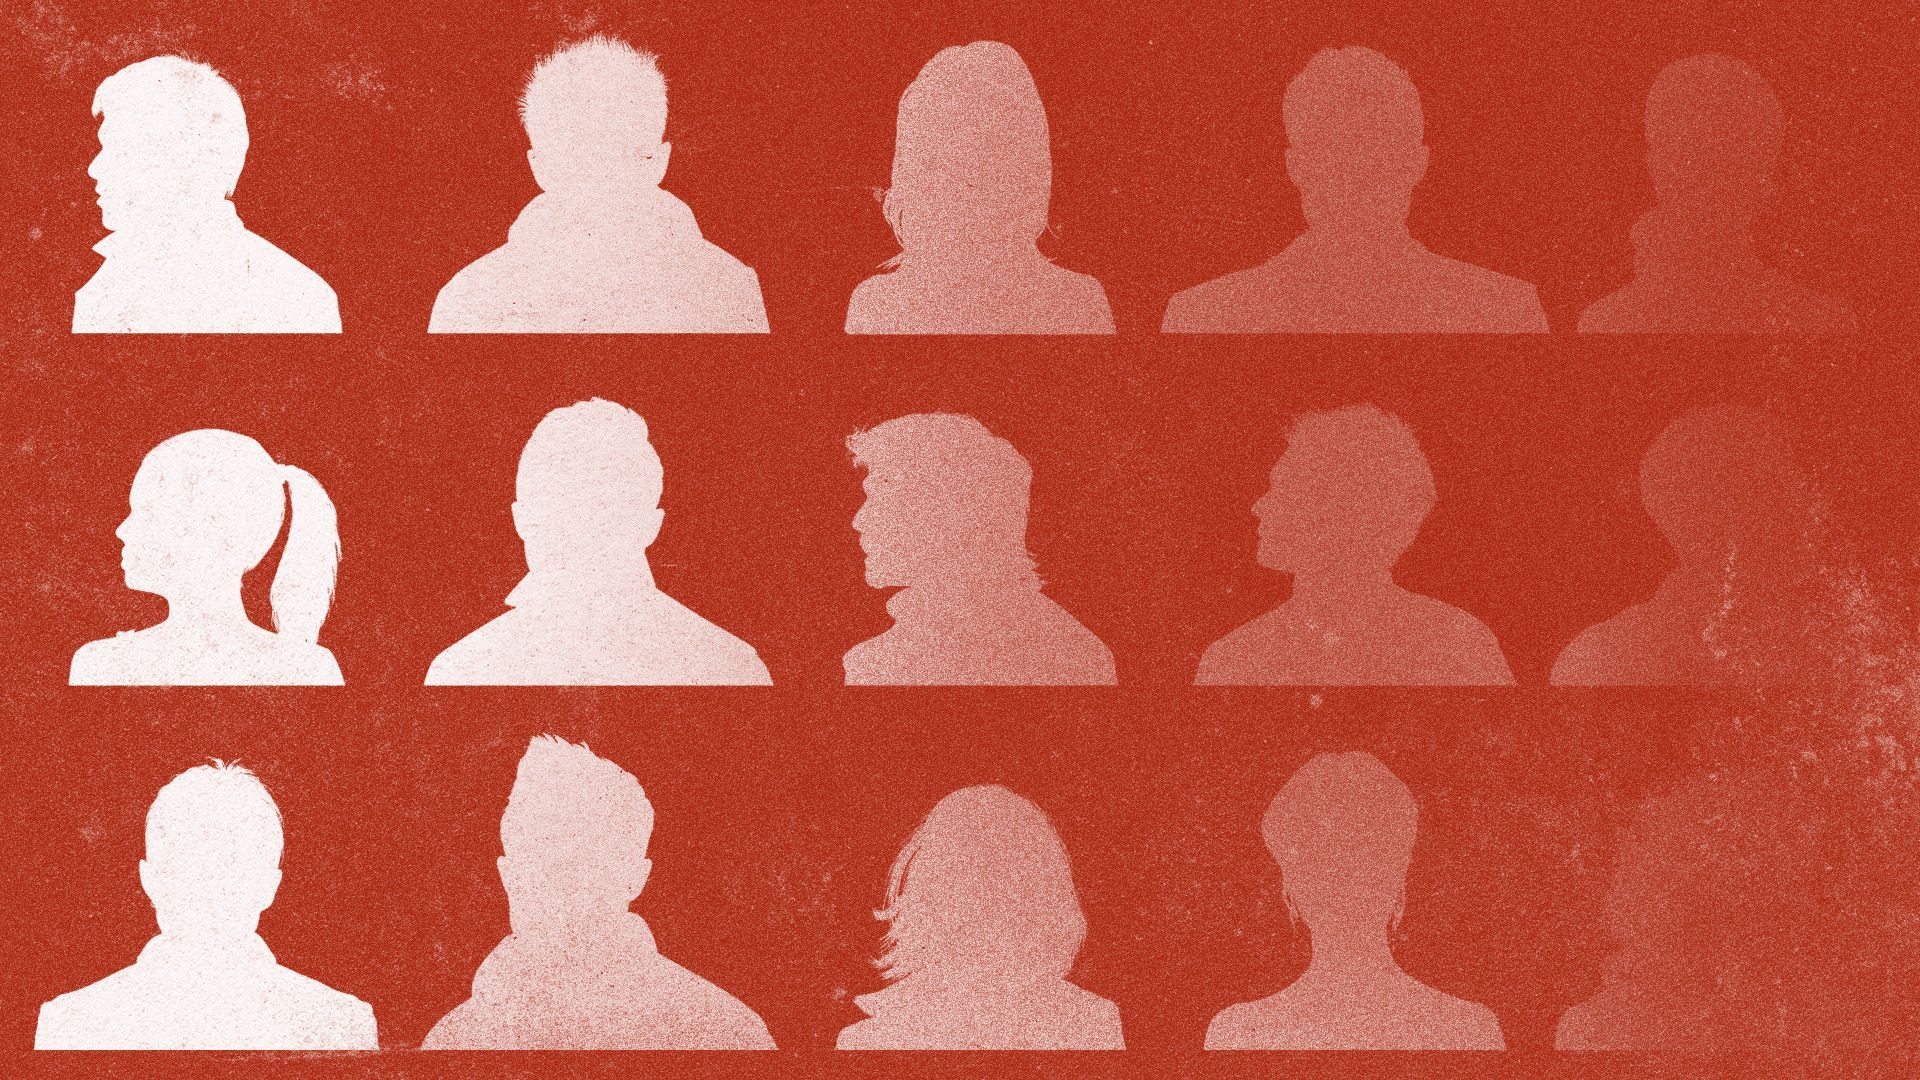 Illustration of a grid of silhouettes of people's faces fading from left to right.